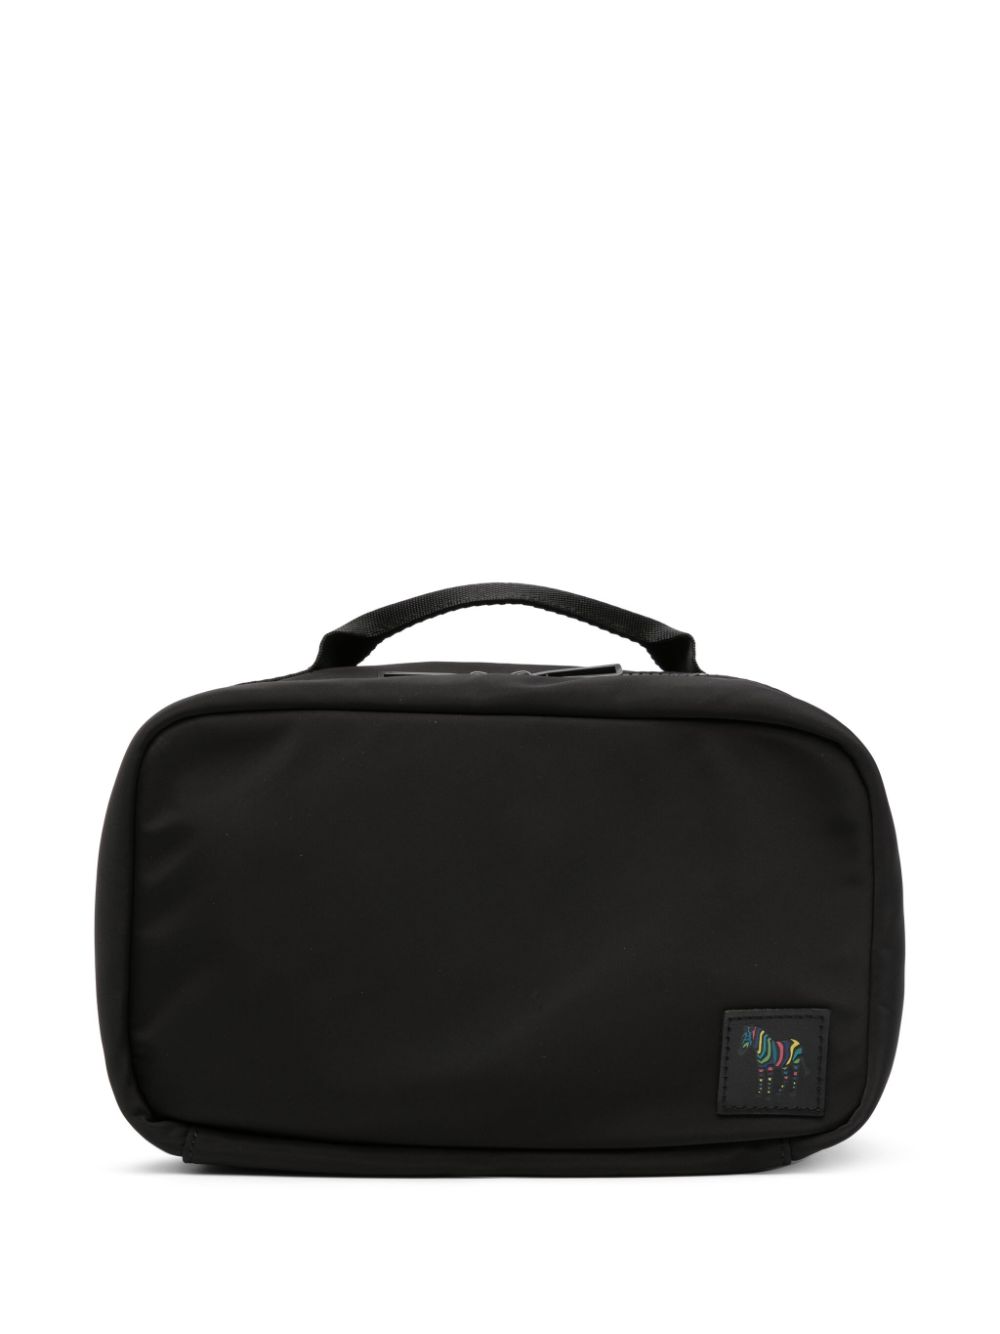 PS Paul Smith logo-patch messenger bag price in Doha Qatar